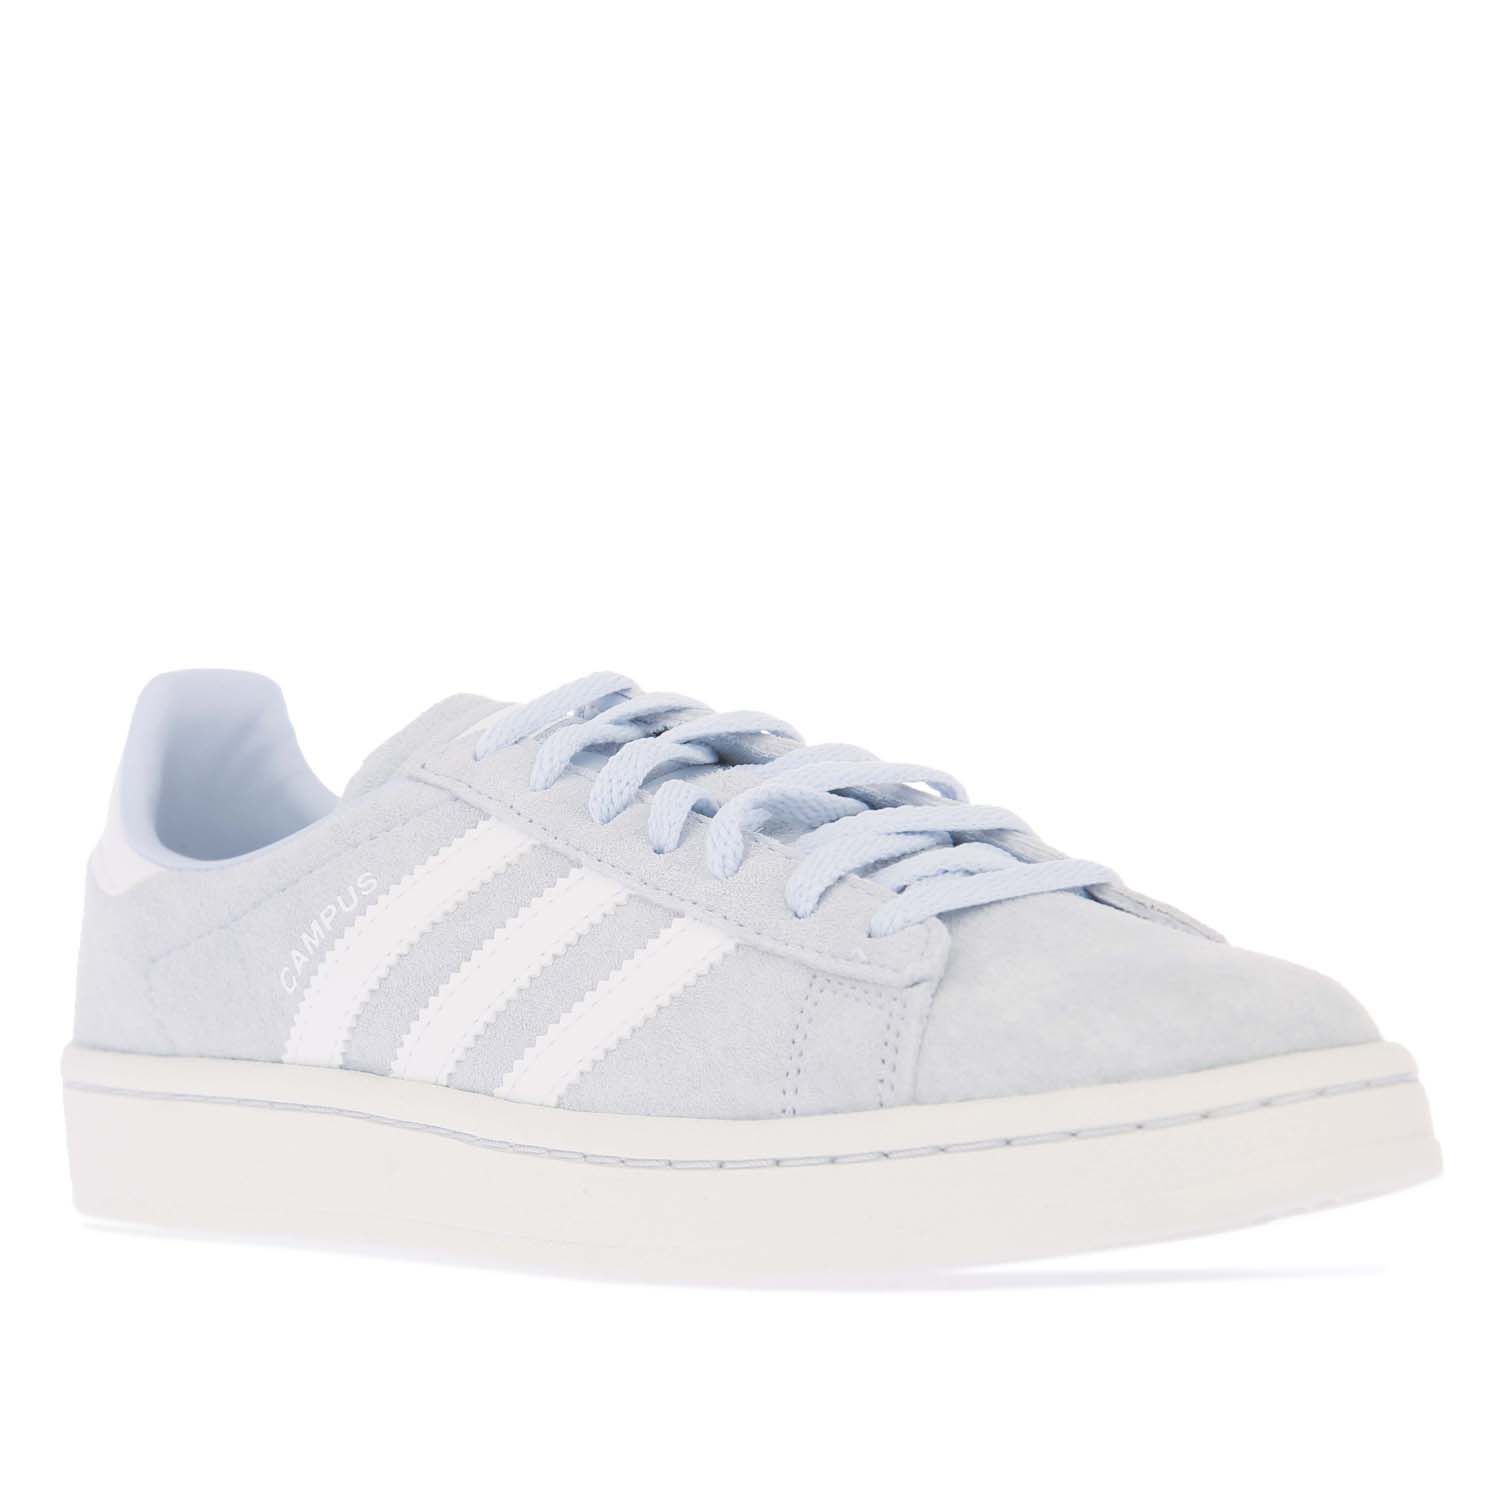 Womens adidas Originals Campus Trainers in light blue.- Suede upper.- Regular fit.- Lace fastening.- Reinforced toe cap.- Synthetic leather 3- Stripes and heel patch.- Trefoil logo on the tongue and heel patch.- Contrast Campus logo on quarter.- OrthoLite® sockliner.- Rubber outsole.- Leather and suede upper  Synthetic leather lining.- Ref: CQ2105